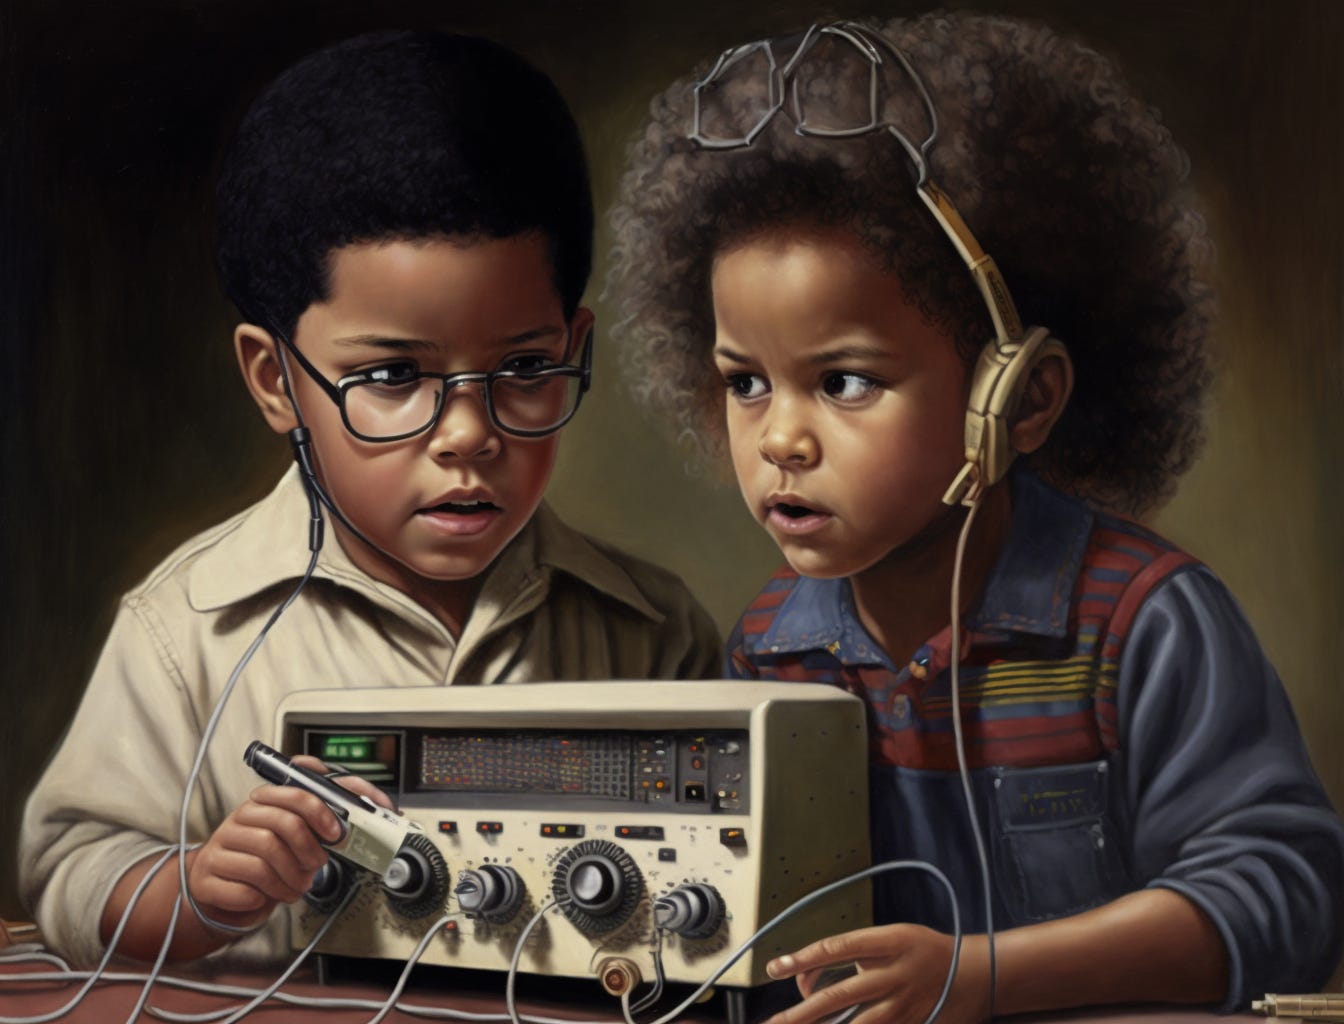 two children learn amateur radio together